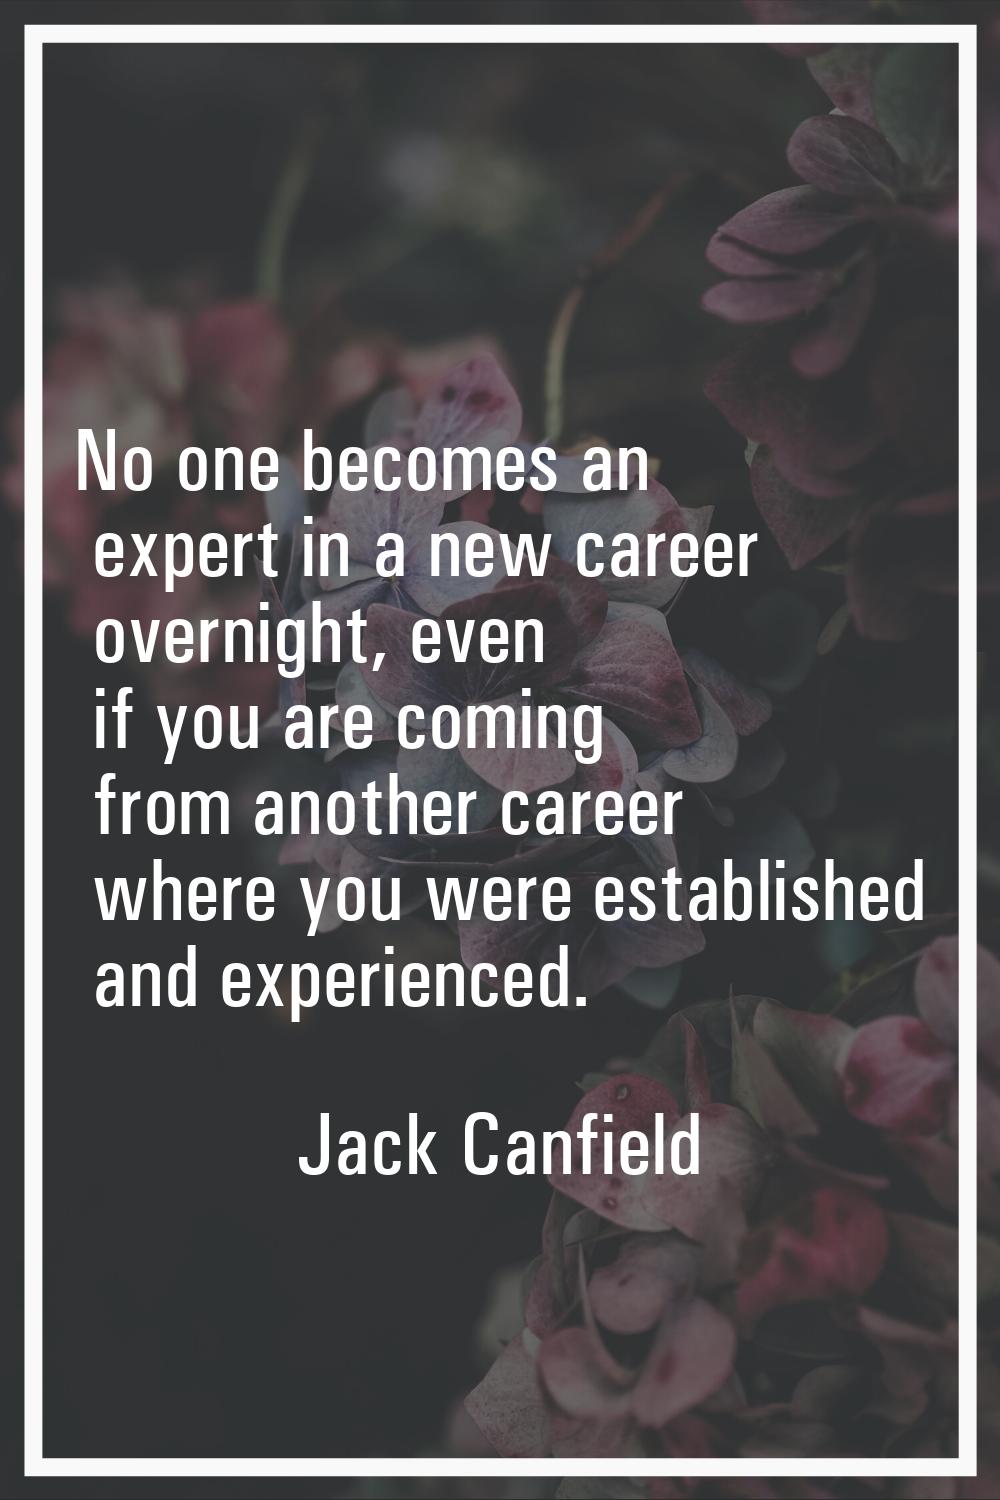 No one becomes an expert in a new career overnight, even if you are coming from another career wher